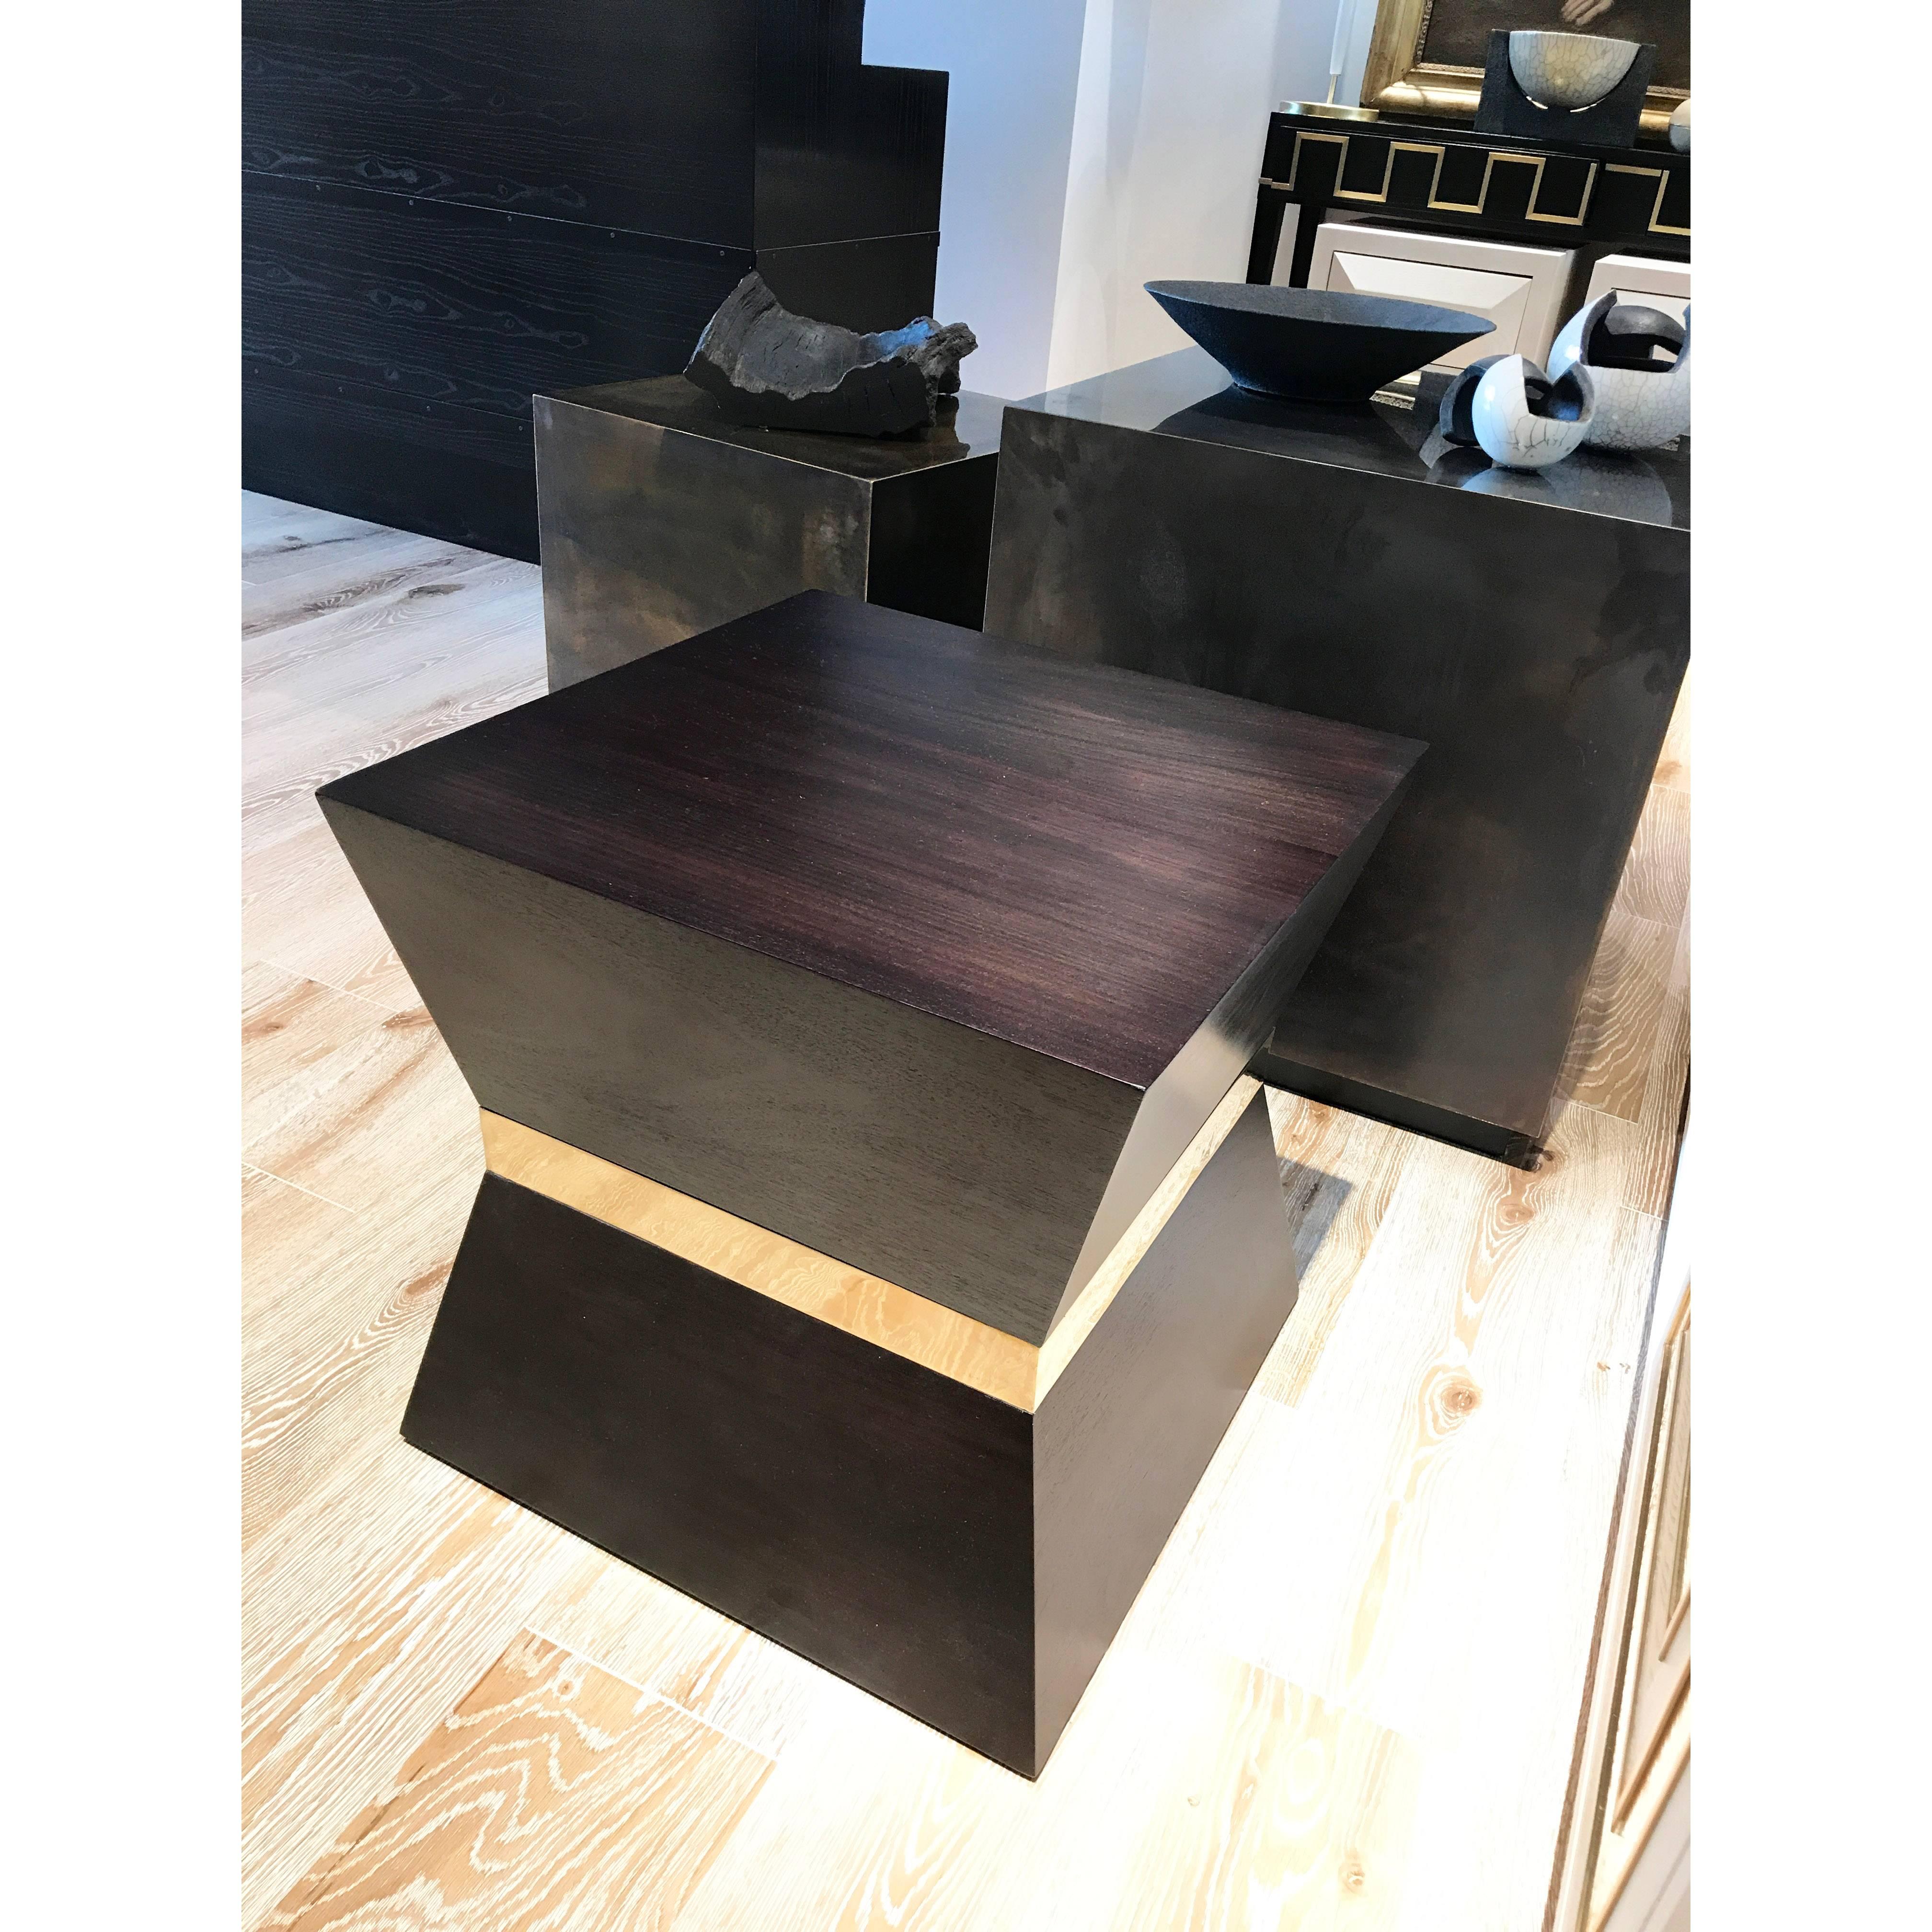 Tapered ash wood satin lacquered side table with brass trim around the middle. Available in black (RAL 9004) or chocolate satin lacquered finish.

W50 x D50 x H50 cm